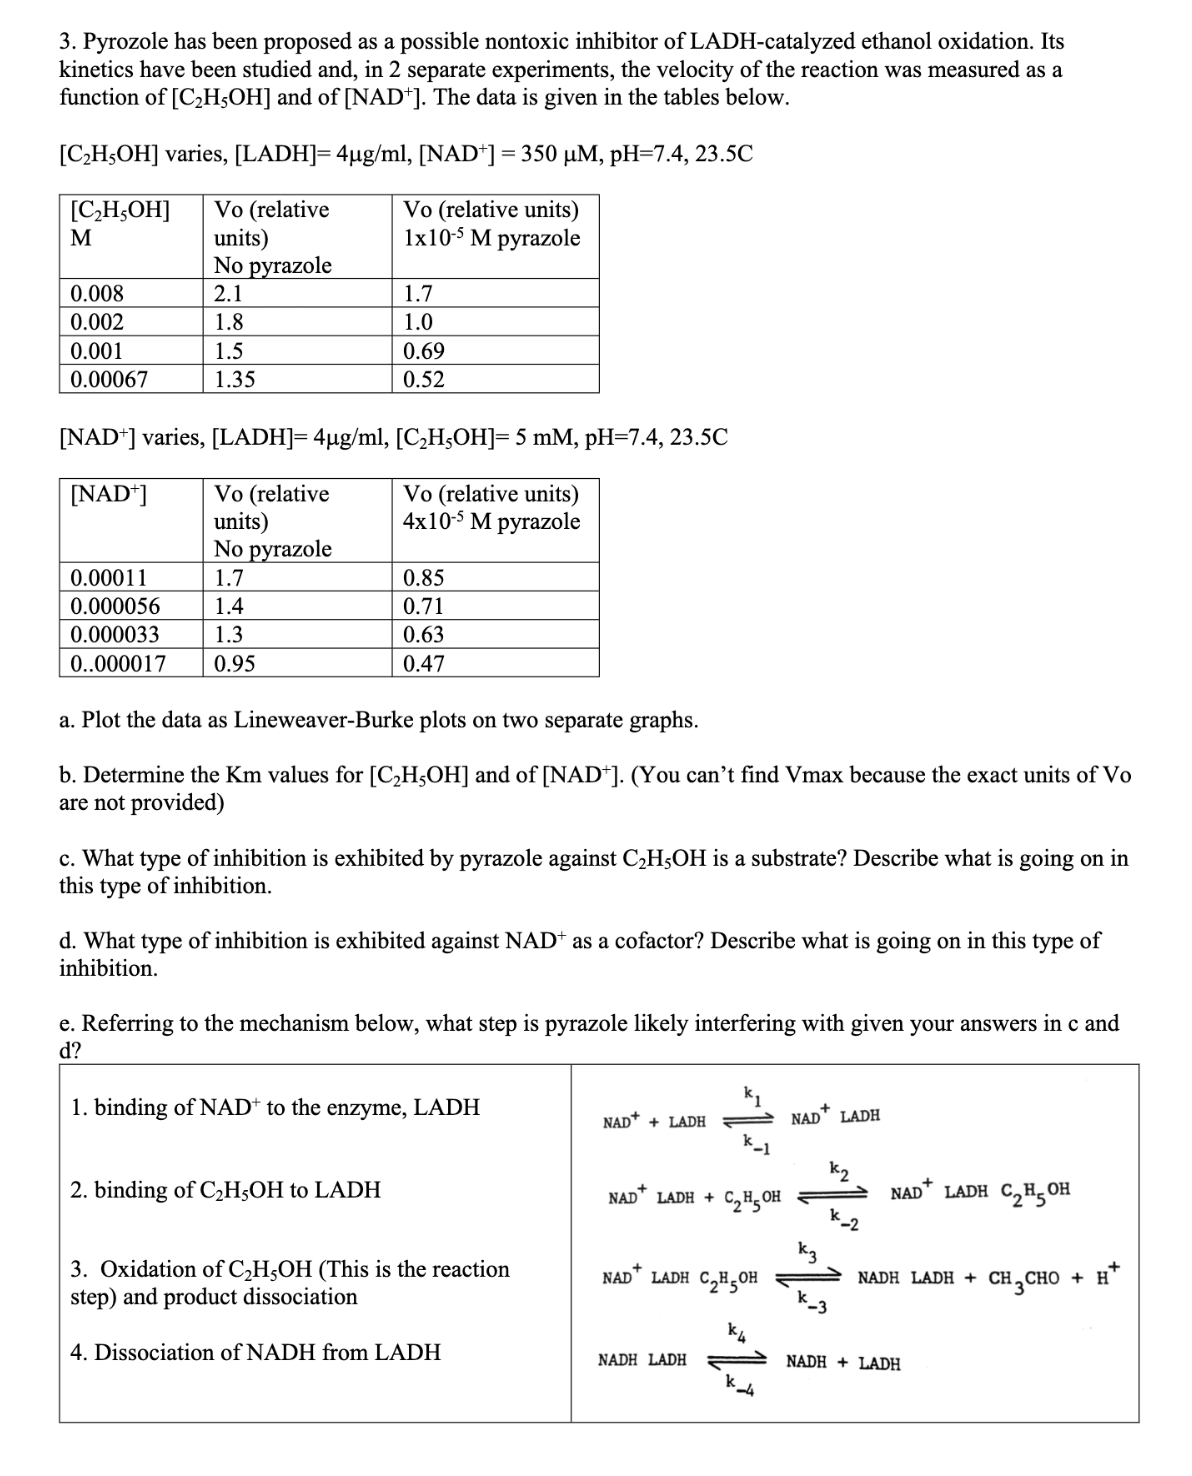 3. Pyrozole has been proposed as a possible nontoxic inhibitor of LADH-catalyzed ethanol oxidation. Its
kinetics have been studied and, in 2 separate experiments, the velocity of the reaction was measured as a
function of [C₂H5OH] and of [NAD+]. The data is given in the tables below.
[C₂H5OH] varies, [LADH]= 4µg/ml, [NAD+] = 350 µM, pH=7.4, 23.5C
[C₂H5OH]
Vo (relative
units)
Vo (relative units)
1x10-5 M pyrazole
M
No pyrazole
2.1
1.8
1.5
1.35
0.008
0.002
0.001
0.00067
Vo (relative
units)
No pyrazole
0.00011
1.7
0.000056
1.4
0.000033
1.3
0..000017 0.95
1.7
1.0
[NAD+] varies, [LADH]= 4µg/ml, [C₂H5OH]= 5 mM, pH=7.4, 23.5C
[NAD+]
Vo (relative units)
4x10-5 M pyrazole
0.69
0.52
0.85
0.71
0.63
0.47
a. Plot the data as Lineweaver-Burke plots on two separate graphs.
b. Determine the Km values for [C₂H5OH] and of [NAD*]. (You can't find Vmax because the exact units of Vo
are not provided)
c. What type of inhibition is exhibited by pyrazole against C₂H5OH is a substrate? Describe what is going on in
this type of inhibition.
2. binding of C₂2H5OH to LADH
d. What type of inhibition is exhibited against NAD+ as a cofactor? Describe what is going on in this type of
inhibition.
e. Referring to the mechanism below, what step is pyrazole likely interfering with given your answers in c and
d?
1. binding of NAD+ to the enzyme, LADH
3. Oxidation of C₂H5OH (This is the reaction
step) and product dissociation
4. Dissociation of NADH from LADH
NAD+
+ LADH
NAD LADH +
NAD
k₁
k_1
NADH LADH
C₂H5OH
LADH C₂H5OH
+
NAD LADH
k2
NAD LADH C₂H5OH
ОН
NADH LADH +
NADH+ LADH
CH3CHO + H